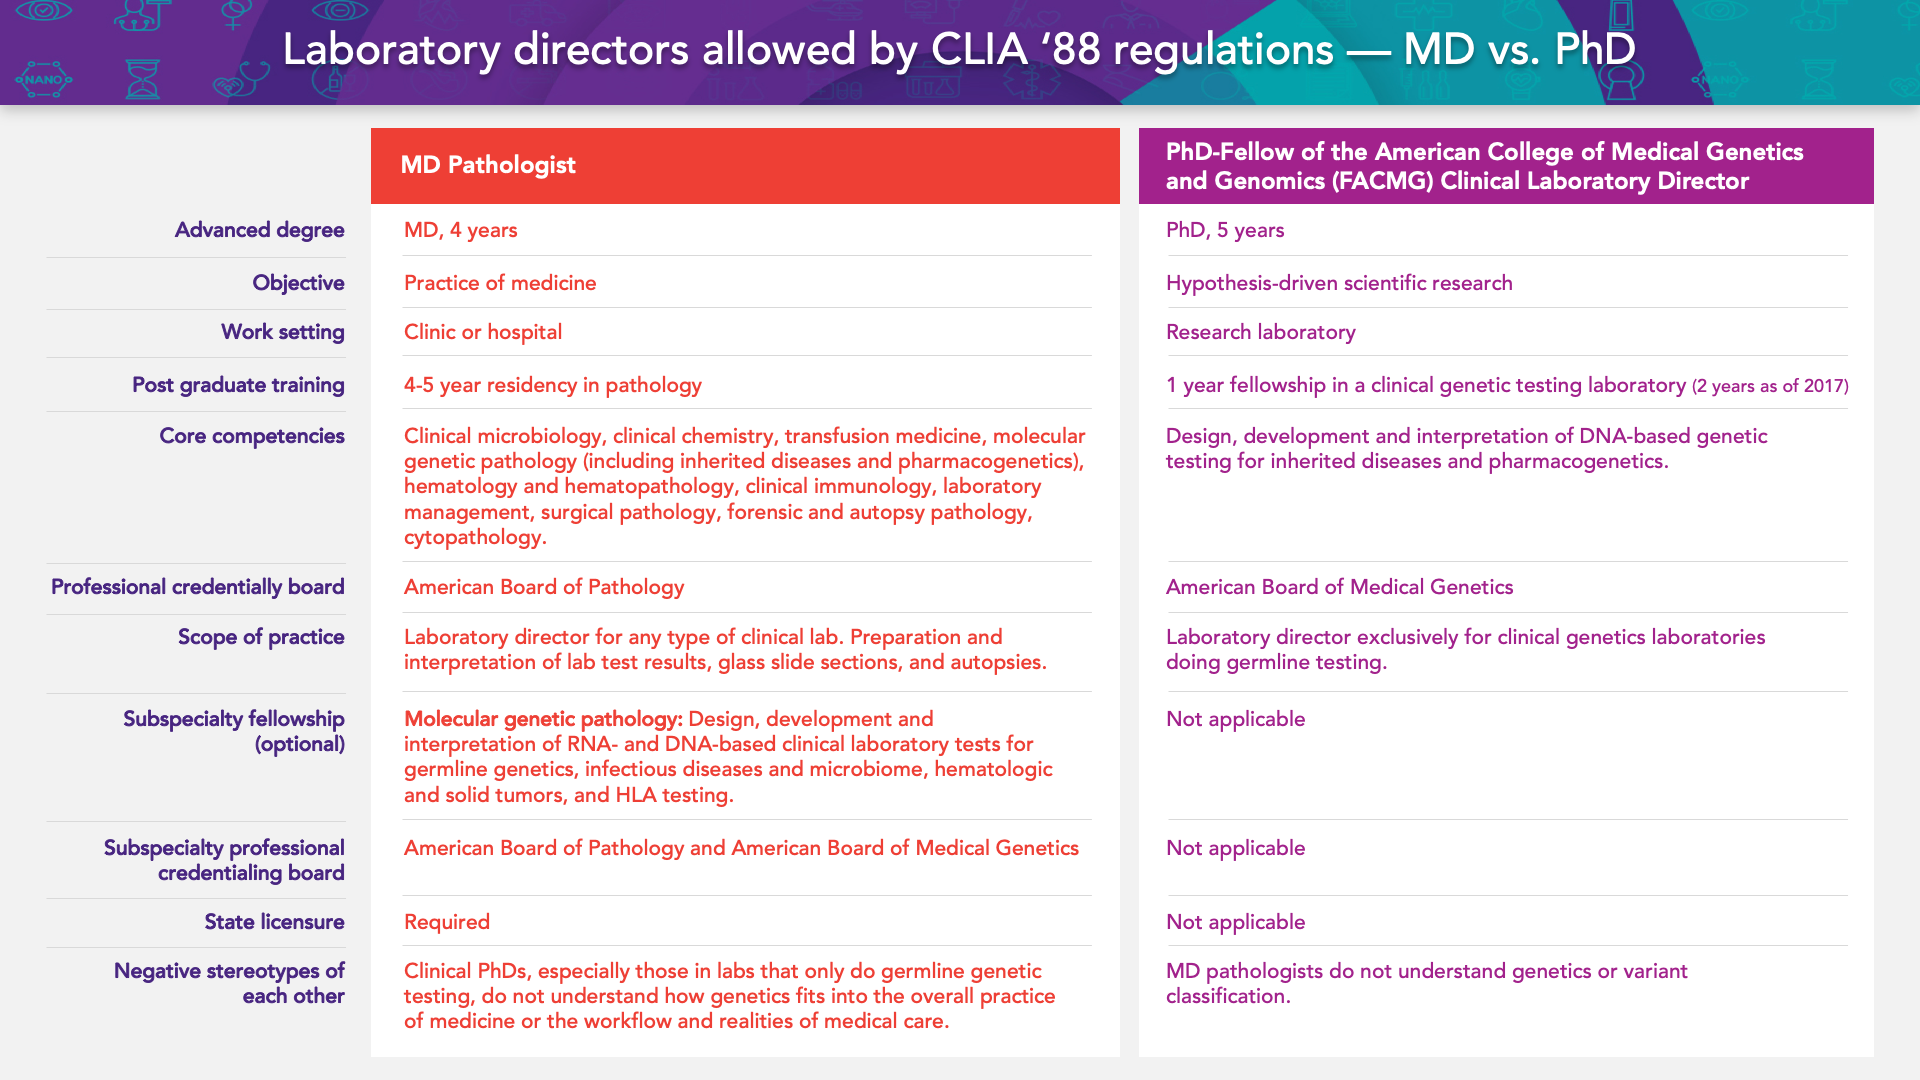    Table 3:    Different types of laboratory directors allowed by CLIA ‘88 regulations.  